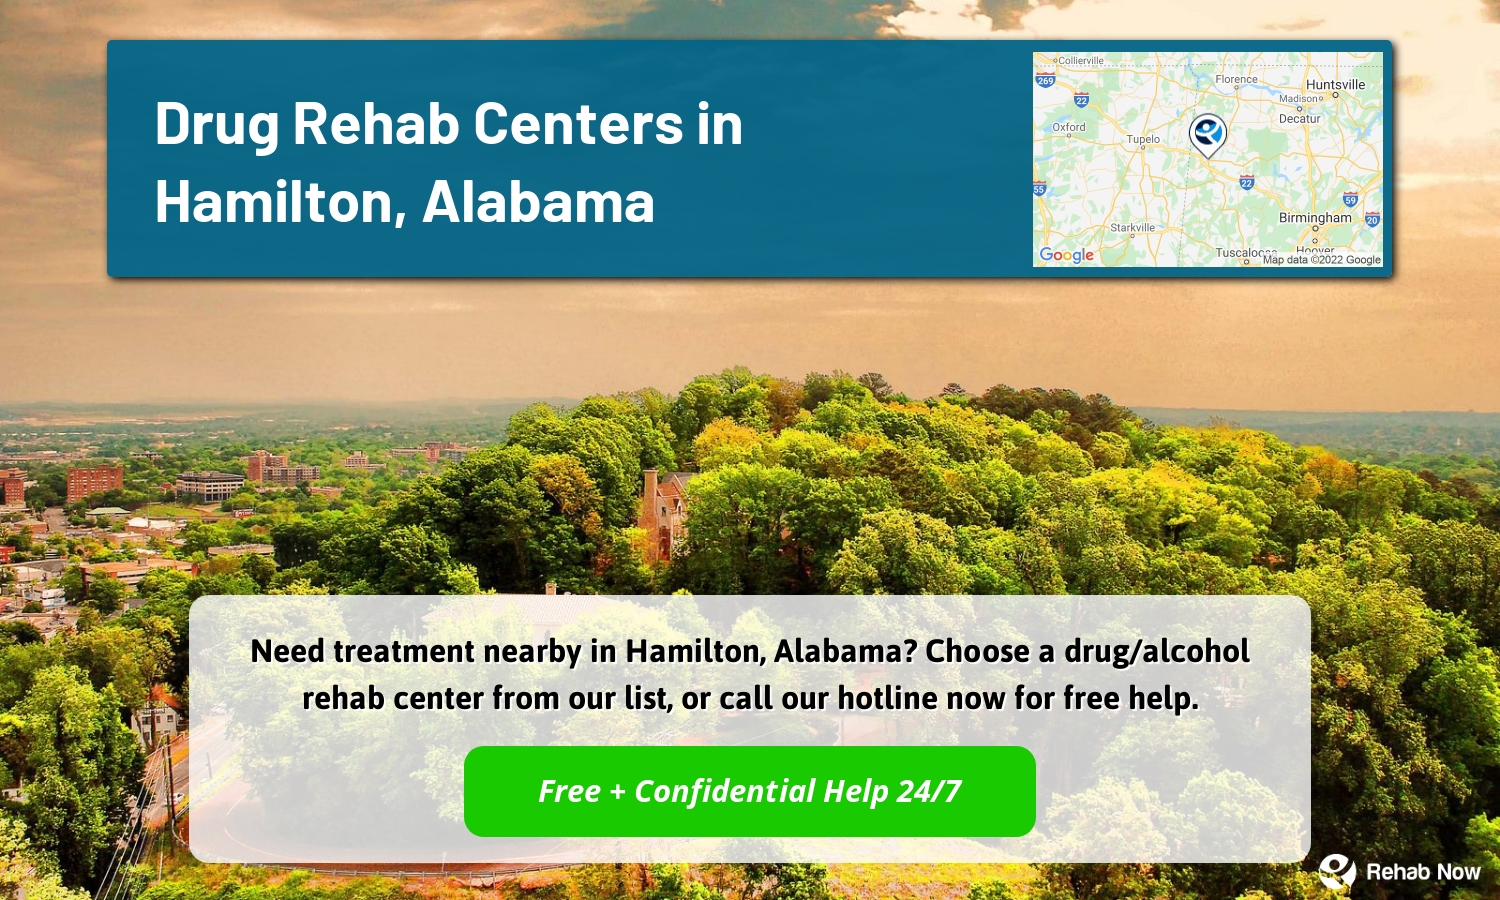 Need treatment nearby in Hamilton, Alabama? Choose a drug/alcohol rehab center from our list, or call our hotline now for free help.